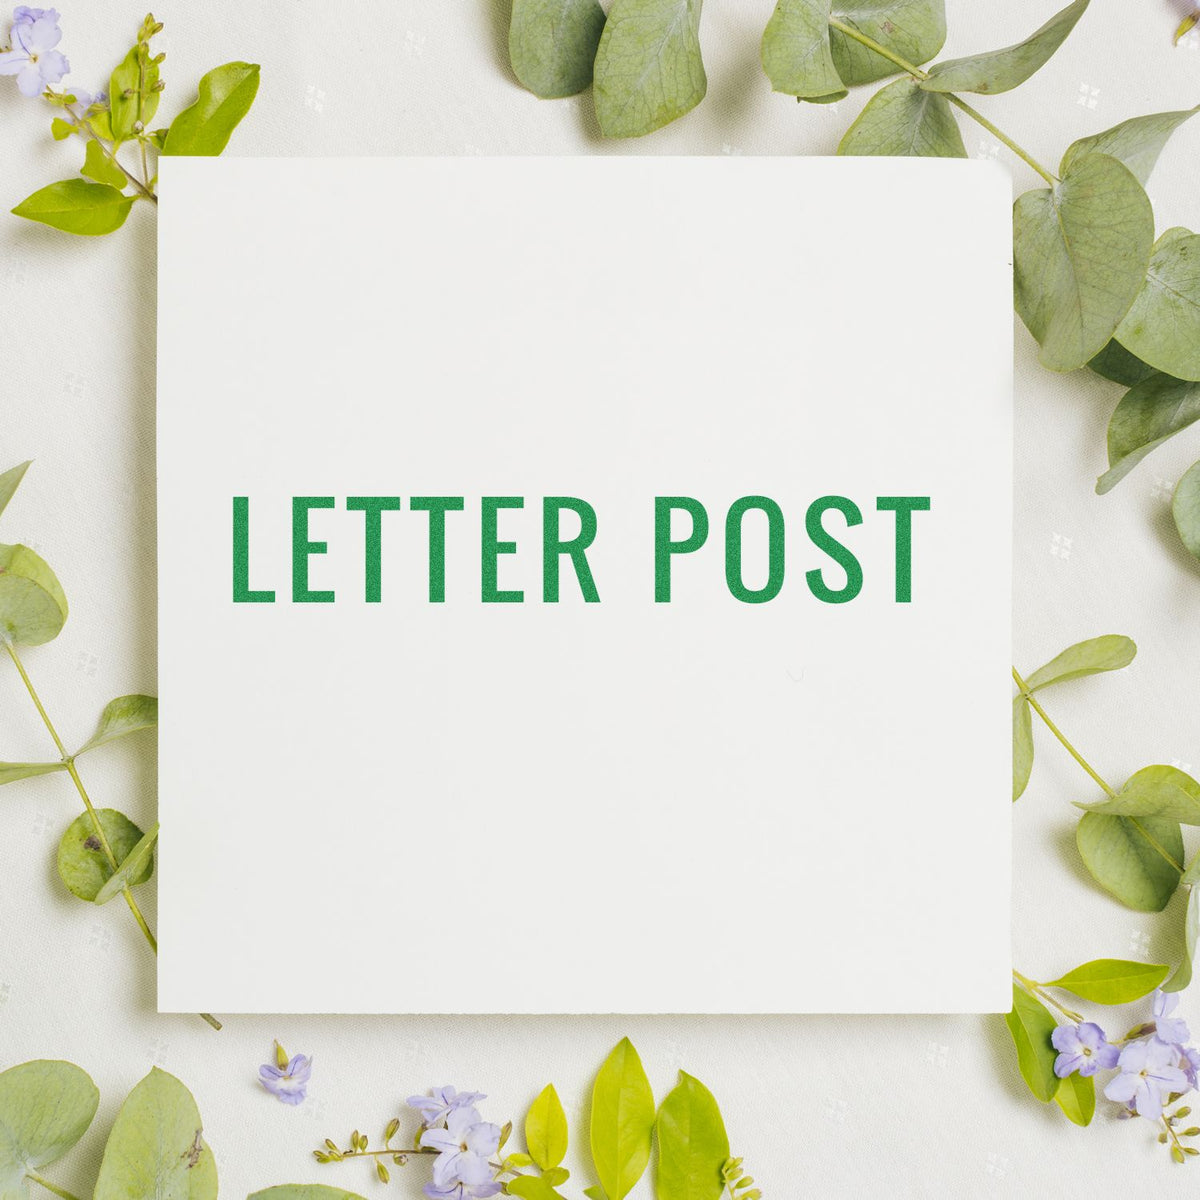 Letter Post Rubber Stamp In Use